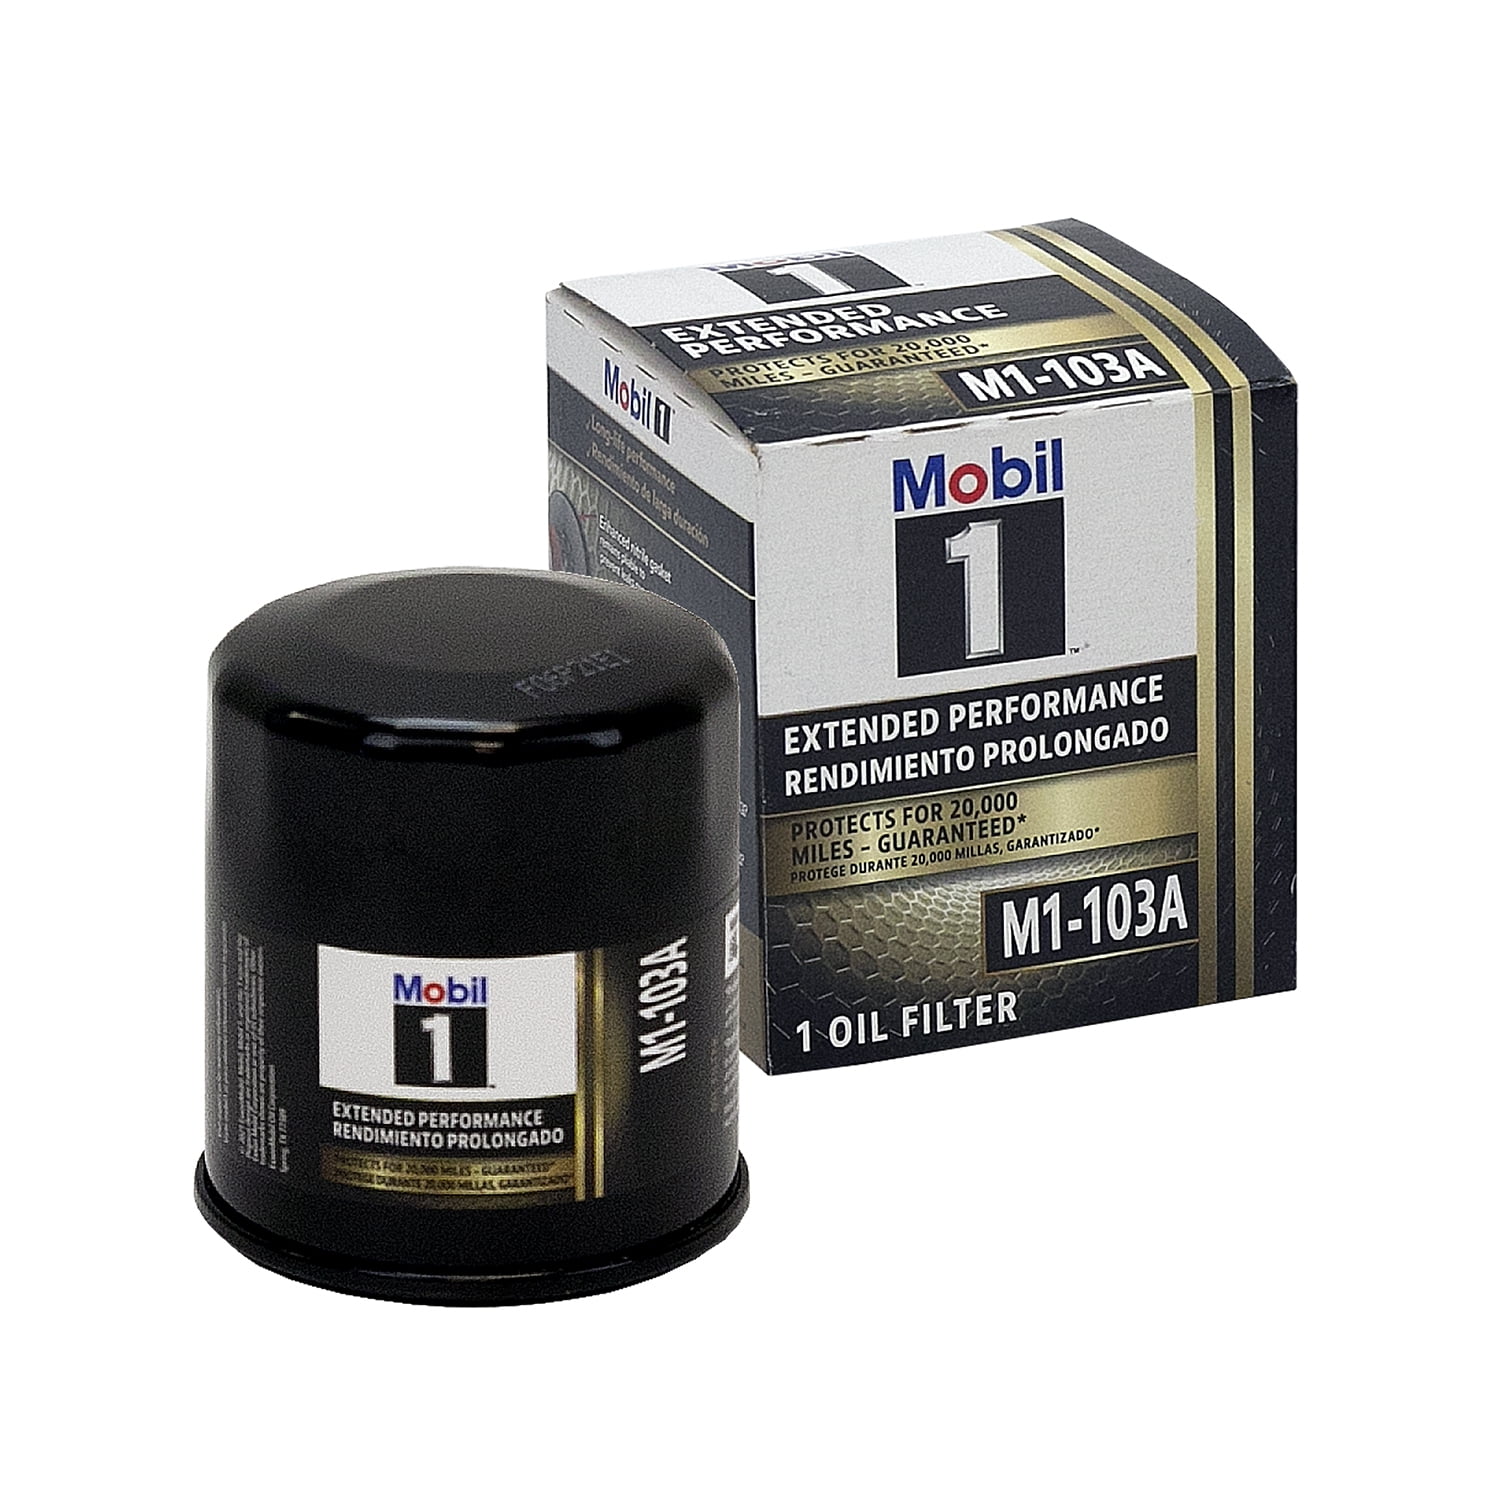 mobil-1-extended-performance-m1-103a-oil-filter-walmart